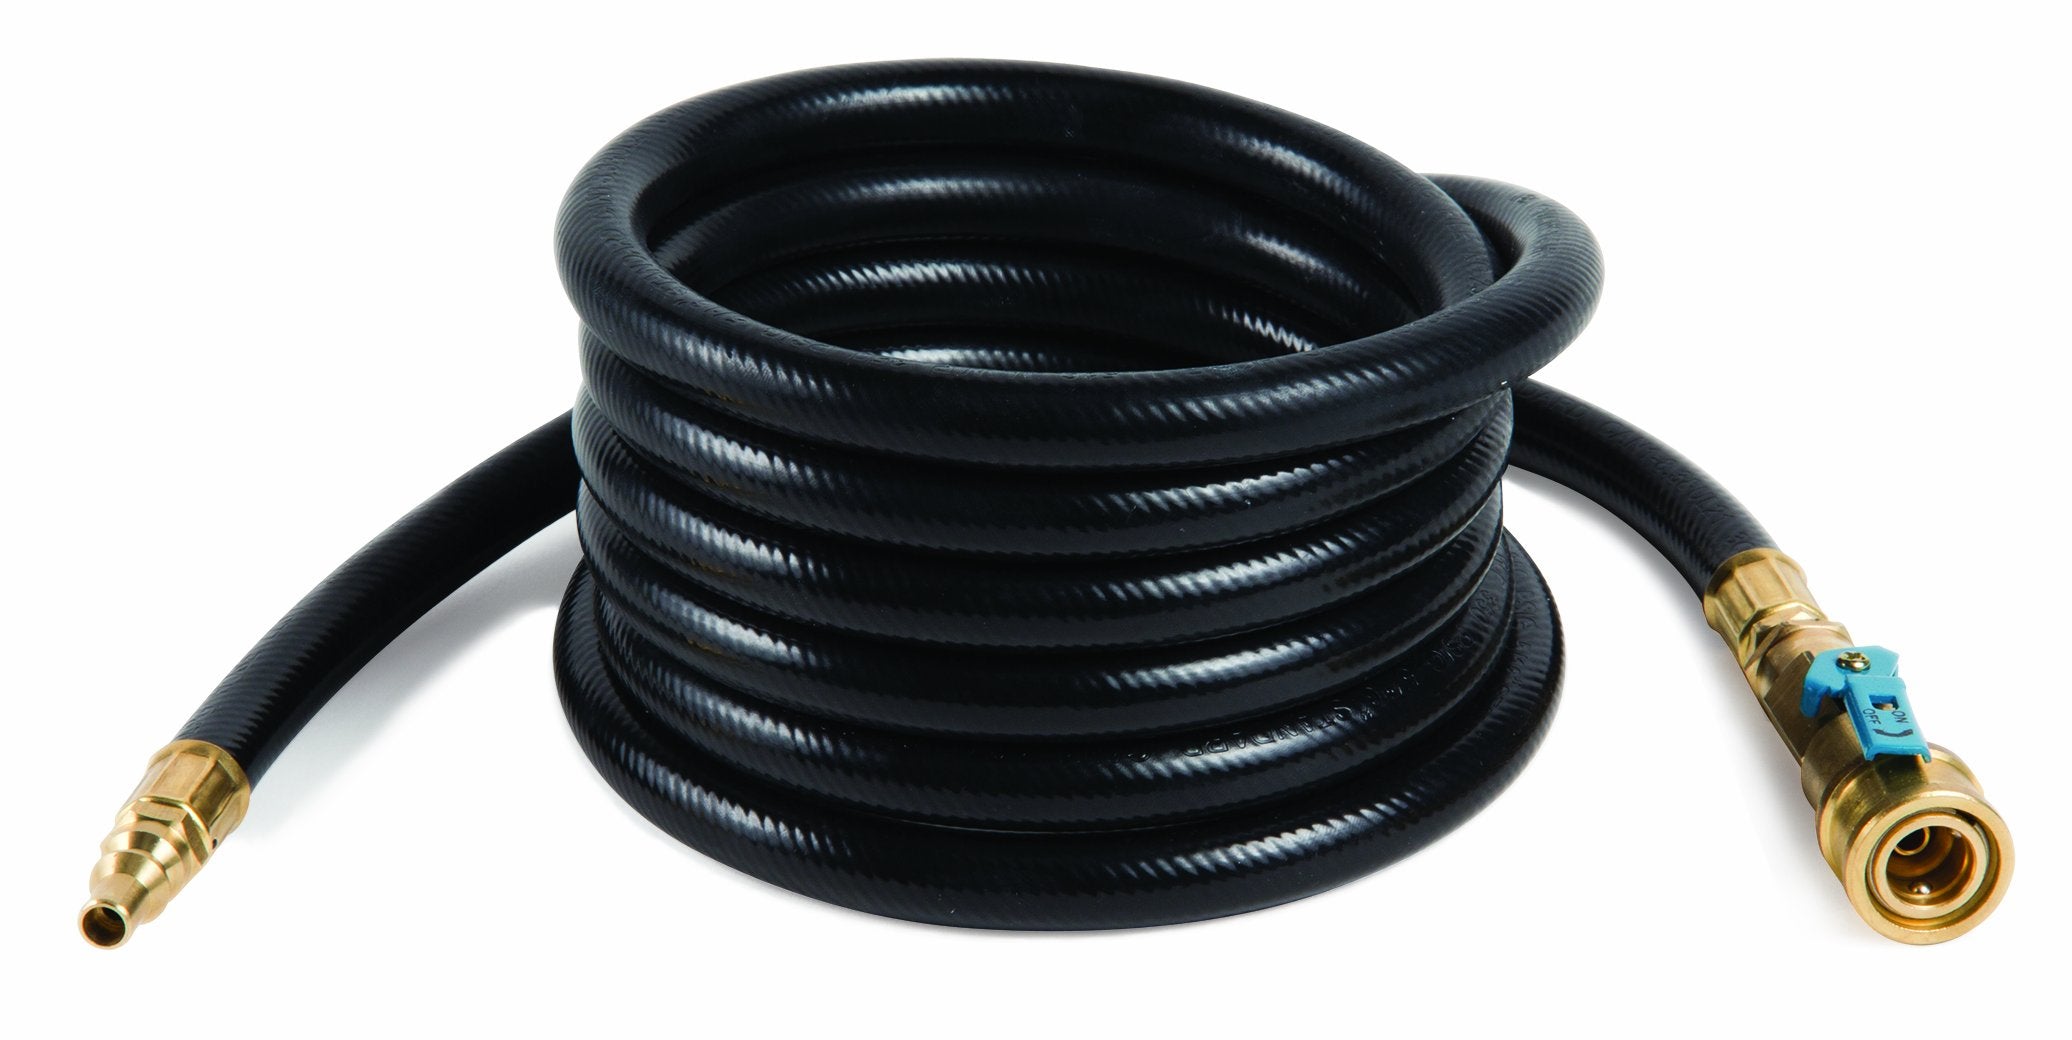 Camco 10ft Heavy Duty Quick-Connect RV Propane Hose